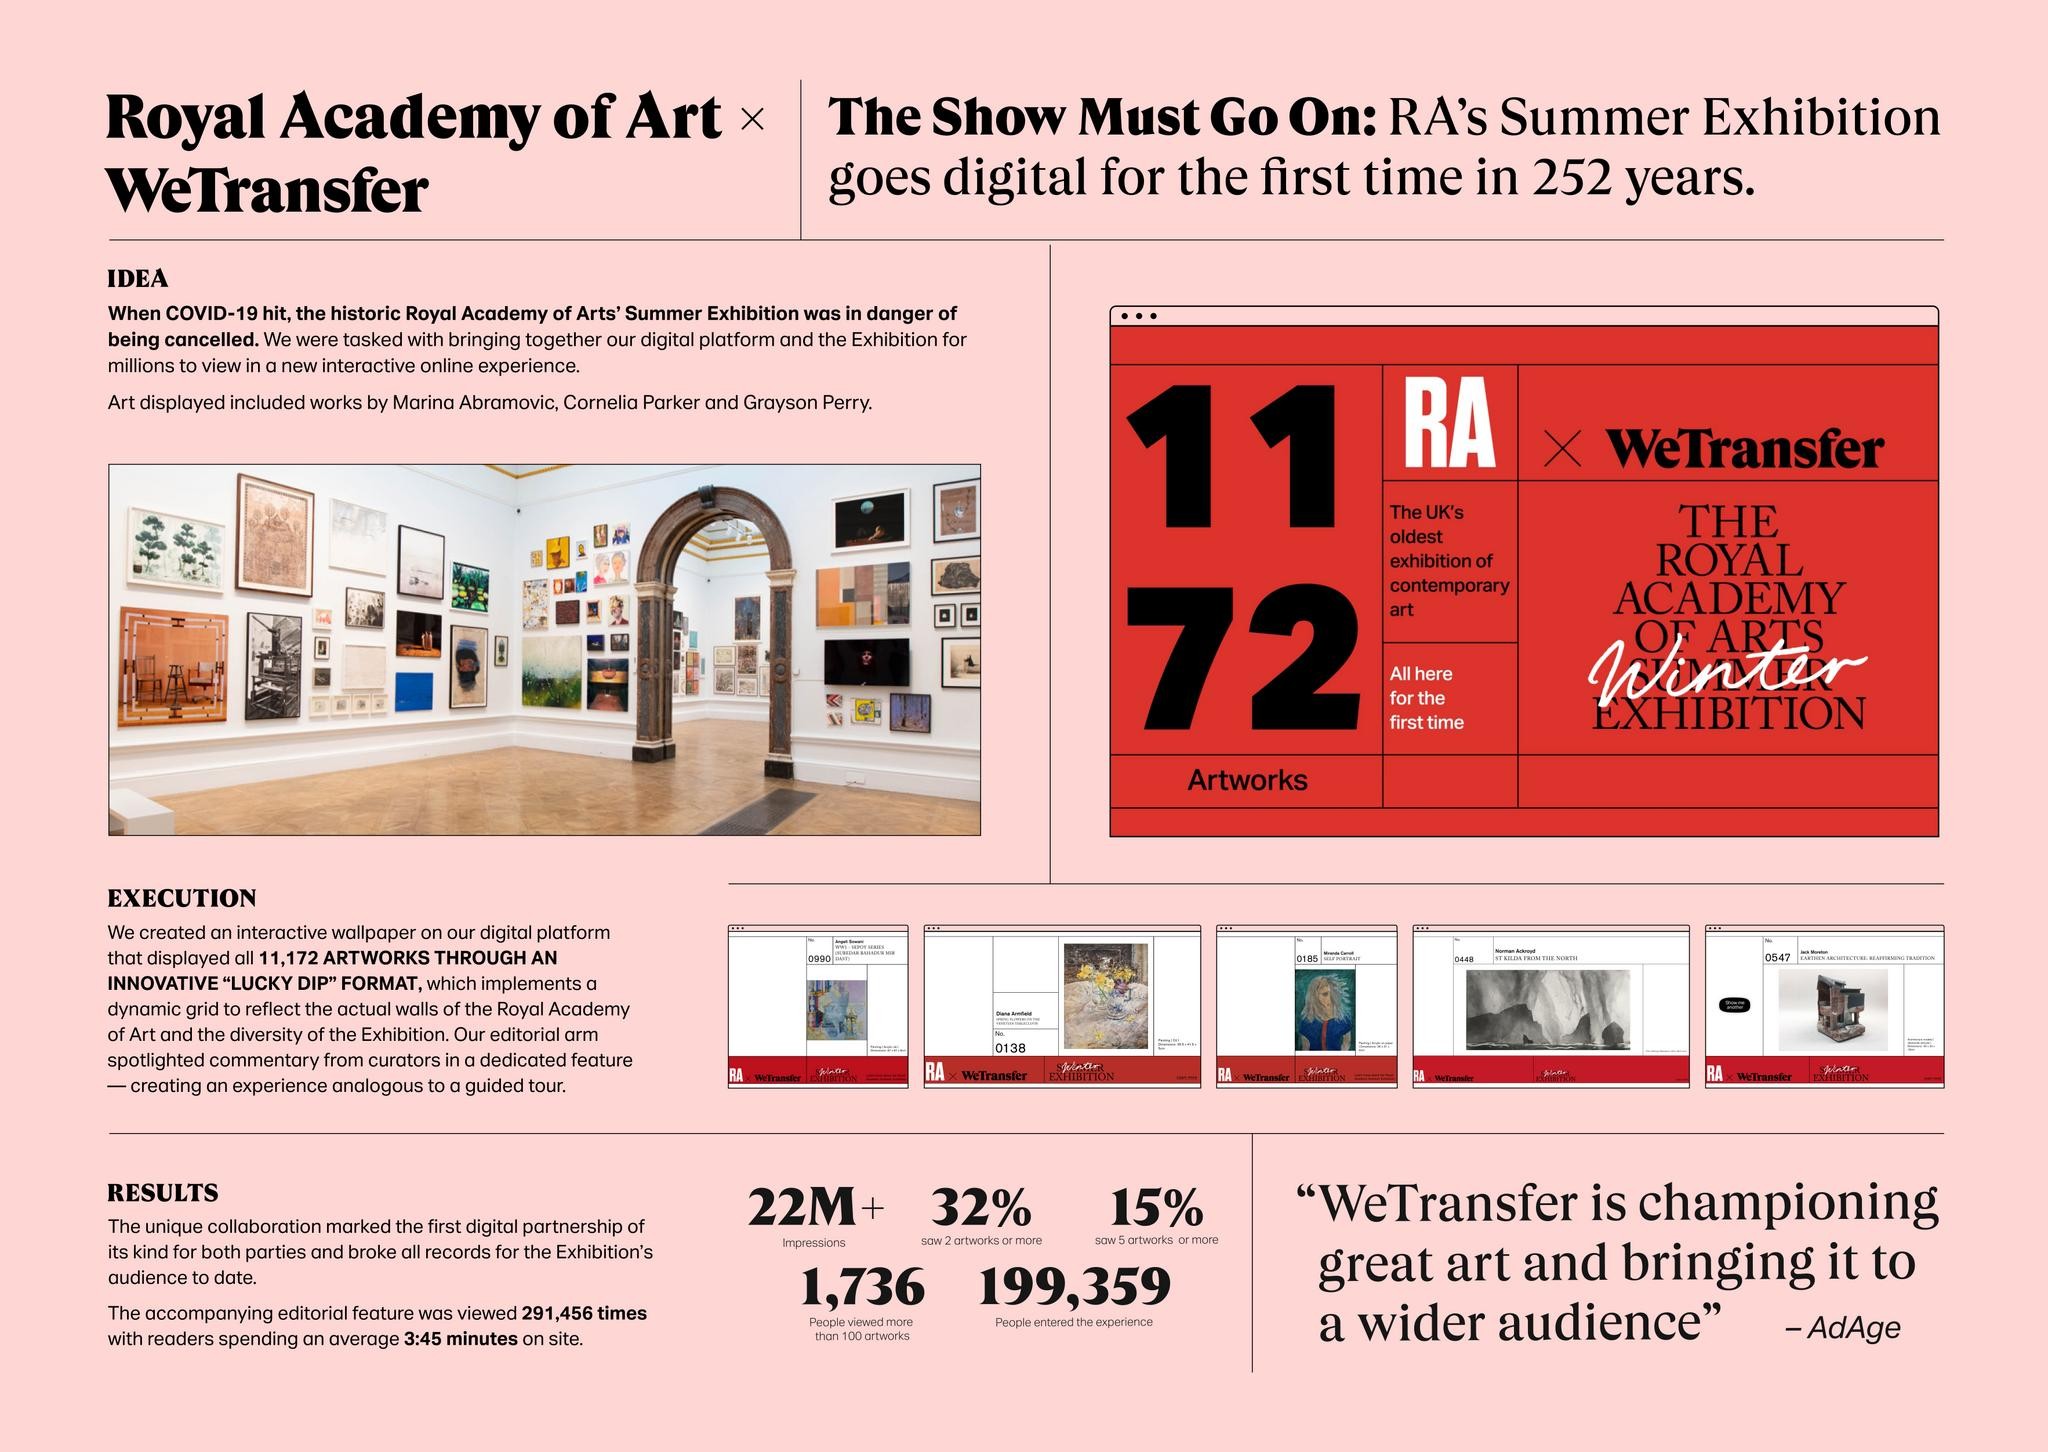 THE ROYAL ACADEMY OF ARTS ONLINE EXHIBITION